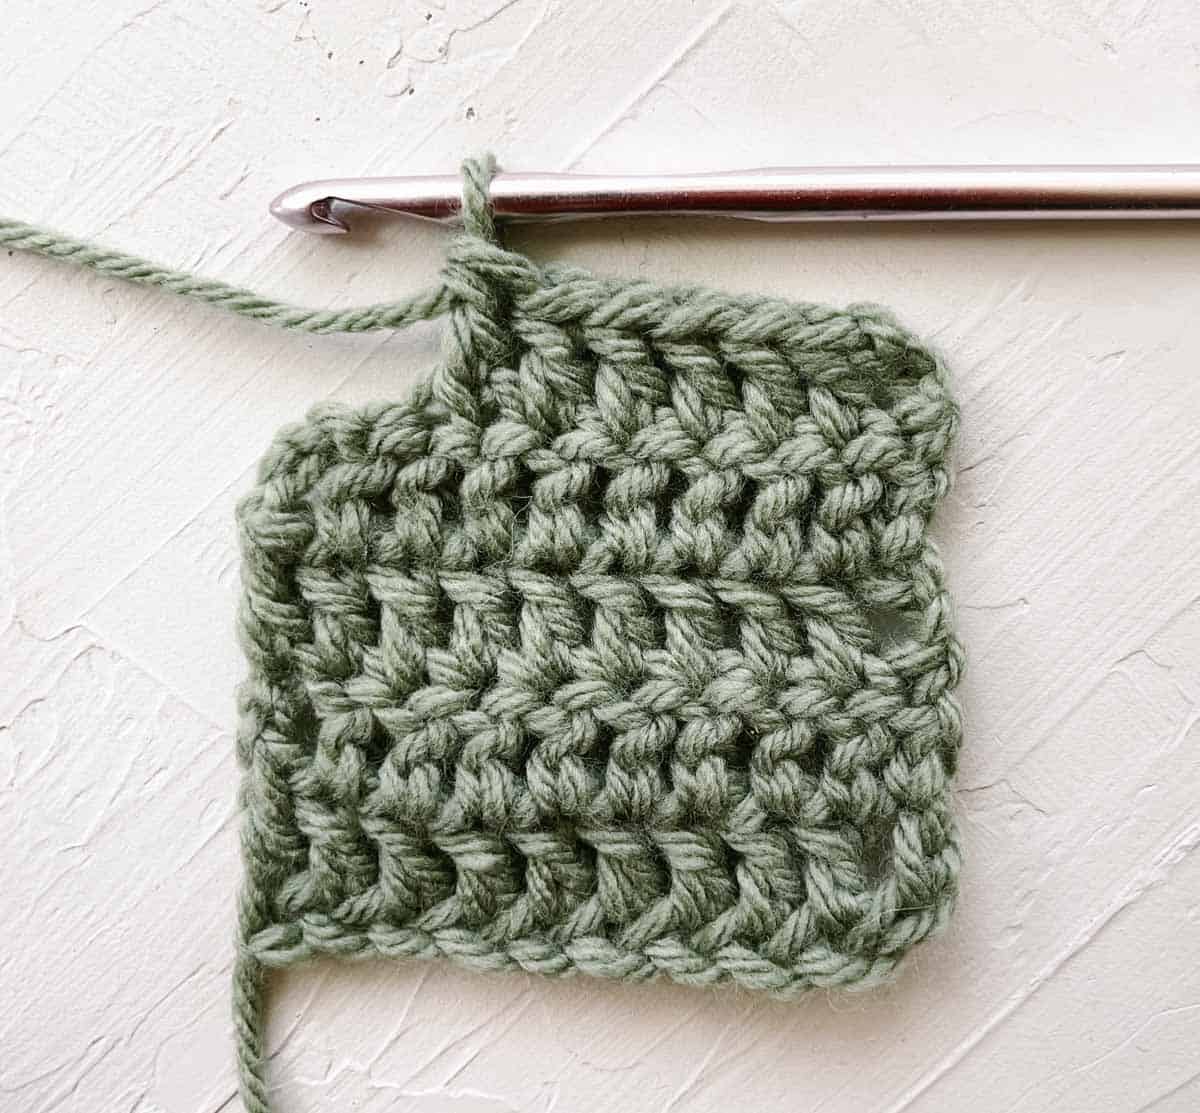 Demonstration of how to double crochet.